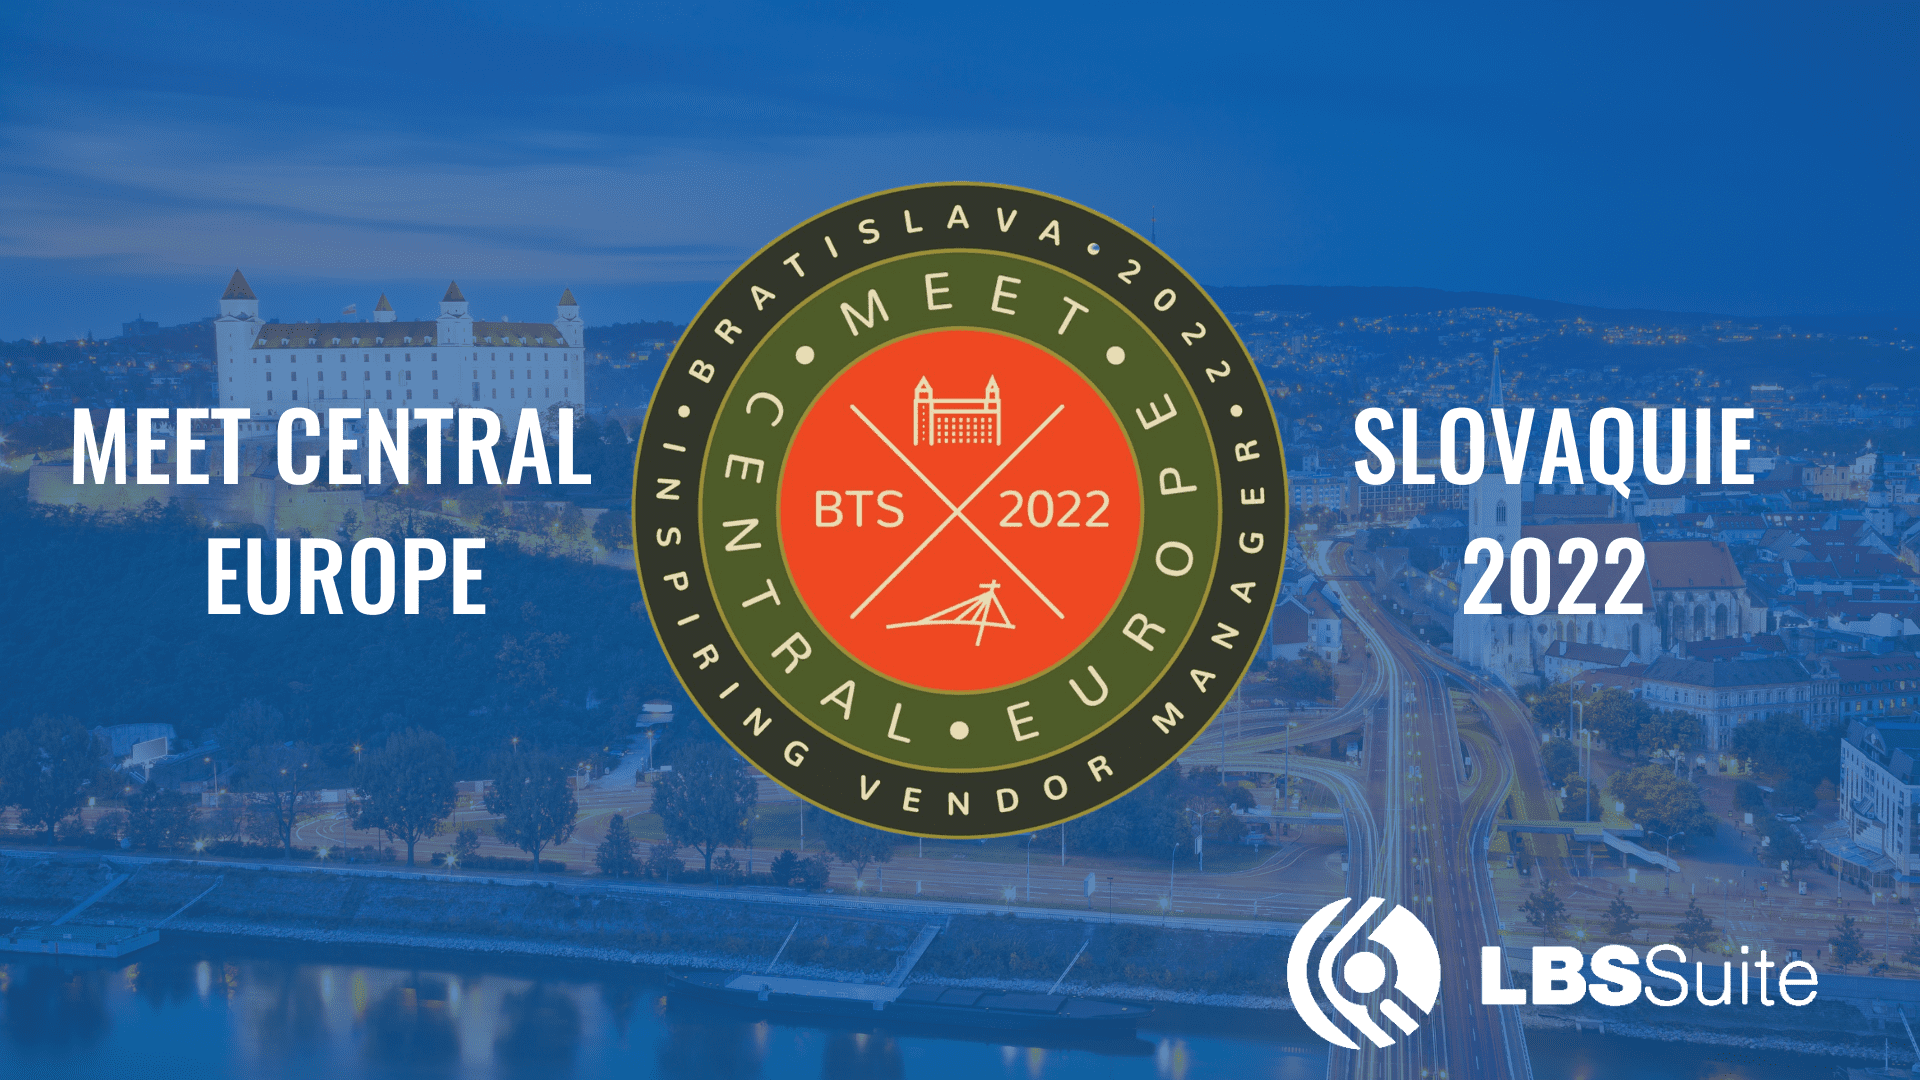 MCE Meet Central Europe Slovaquie 2022 conference LBS Suite lbssuite TBMS tms localization project management xtrf plunet